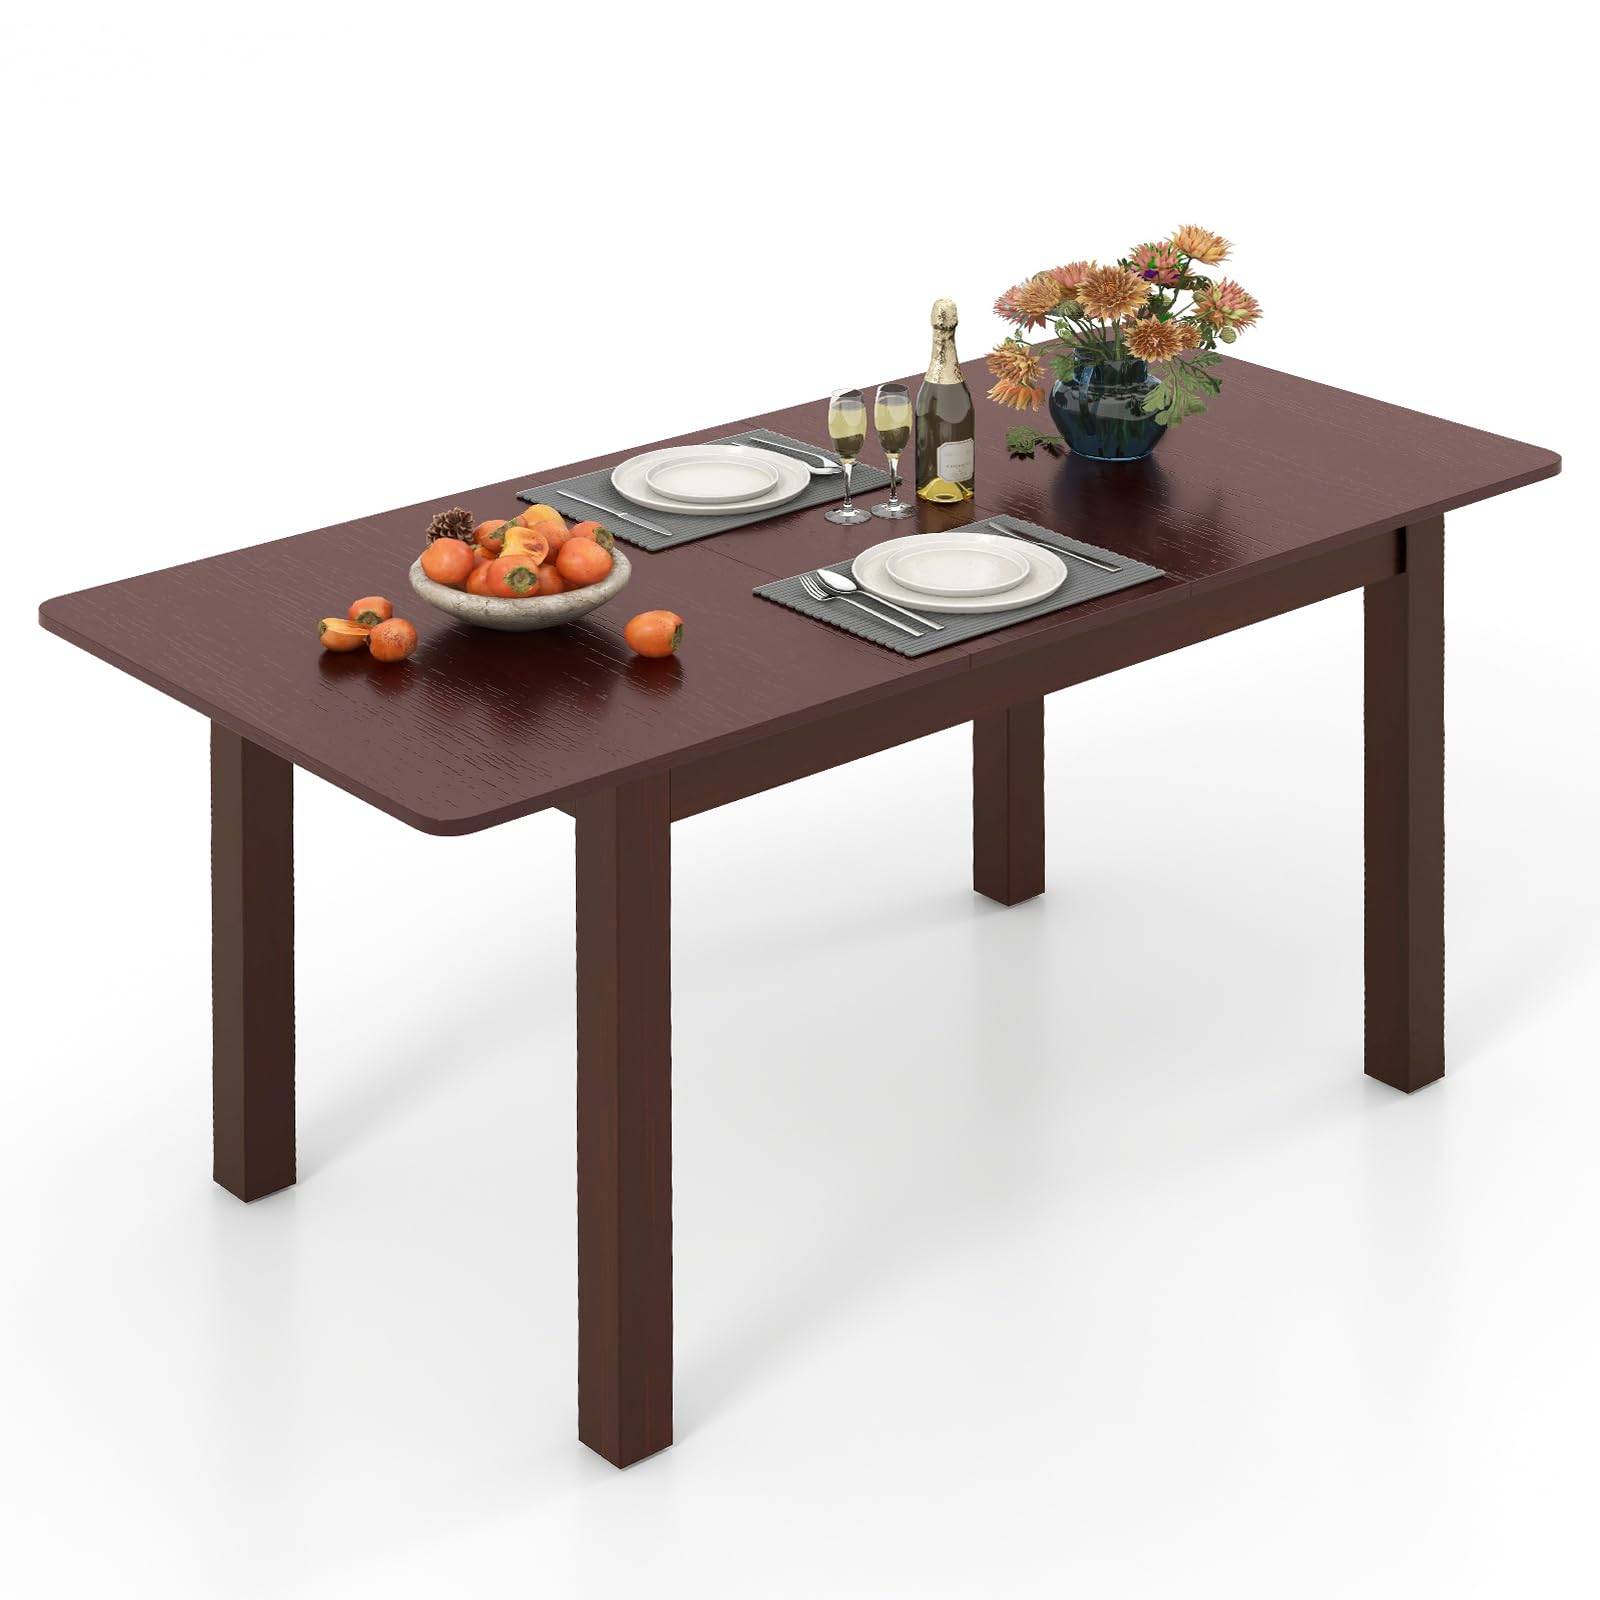 Giantex Extendable Dining Table for 4, 60" Folding Kitchen Table